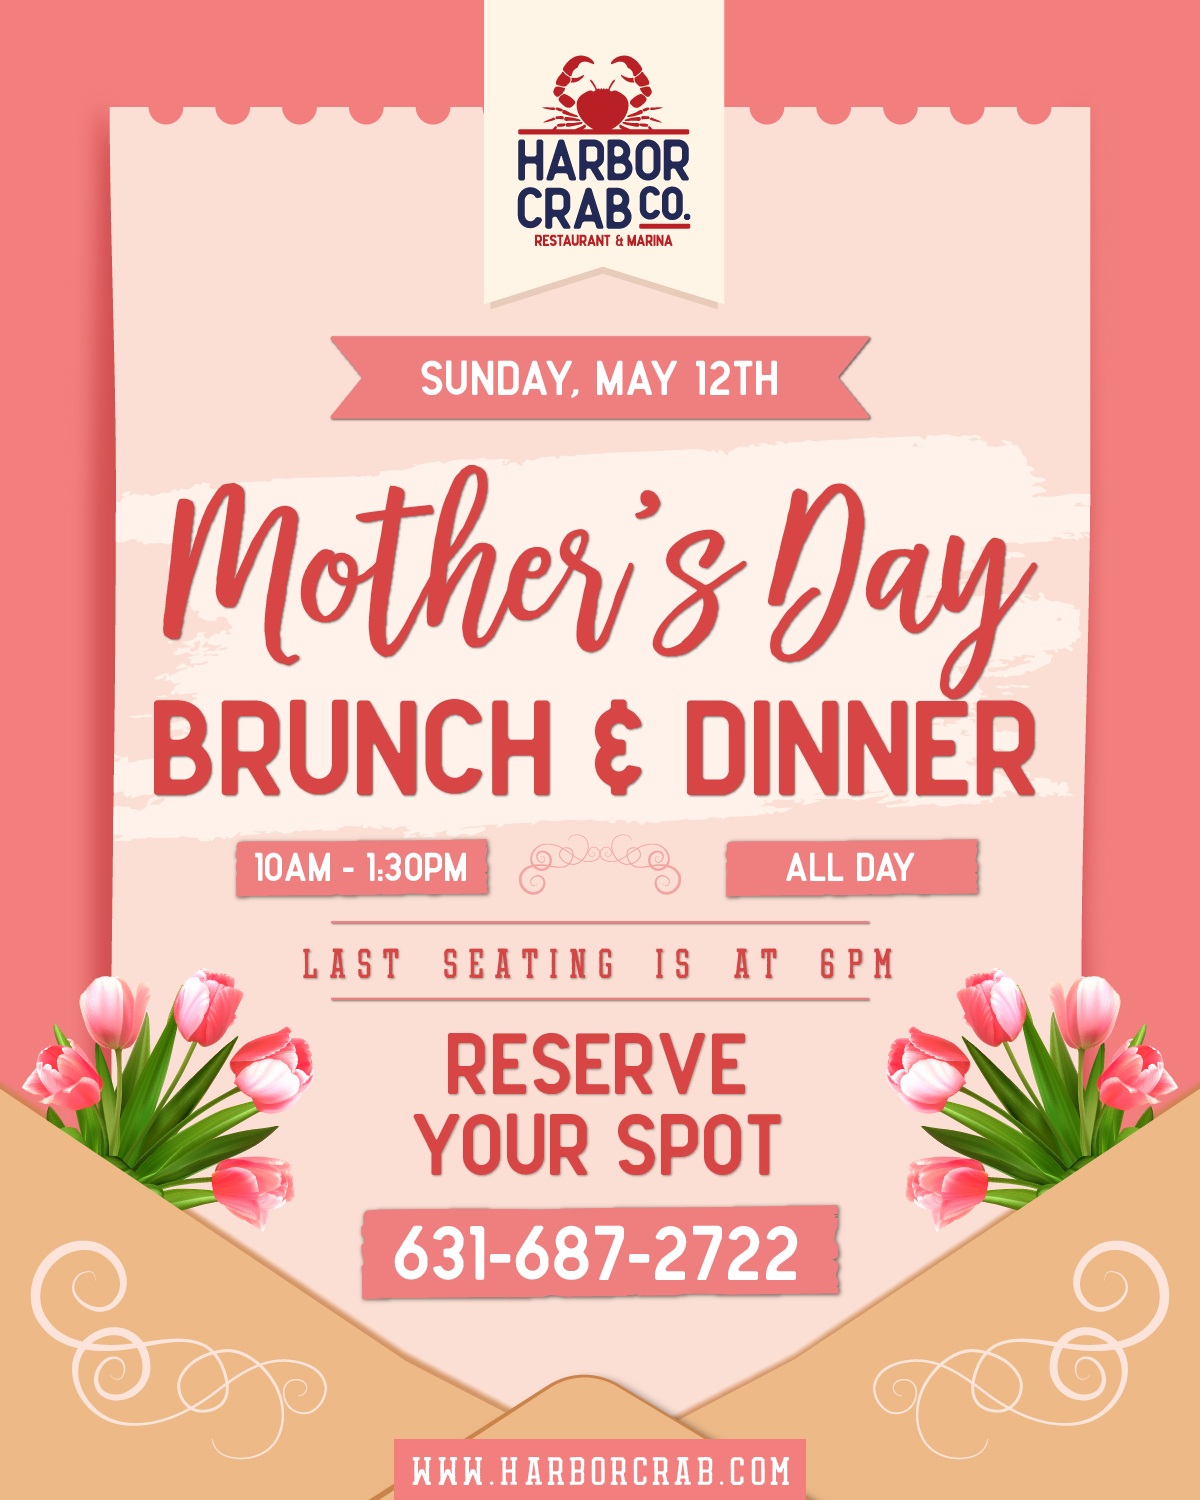 Harbor Crab's Mother's Day event featuring brunch and dinner on Sunday, May 12th.